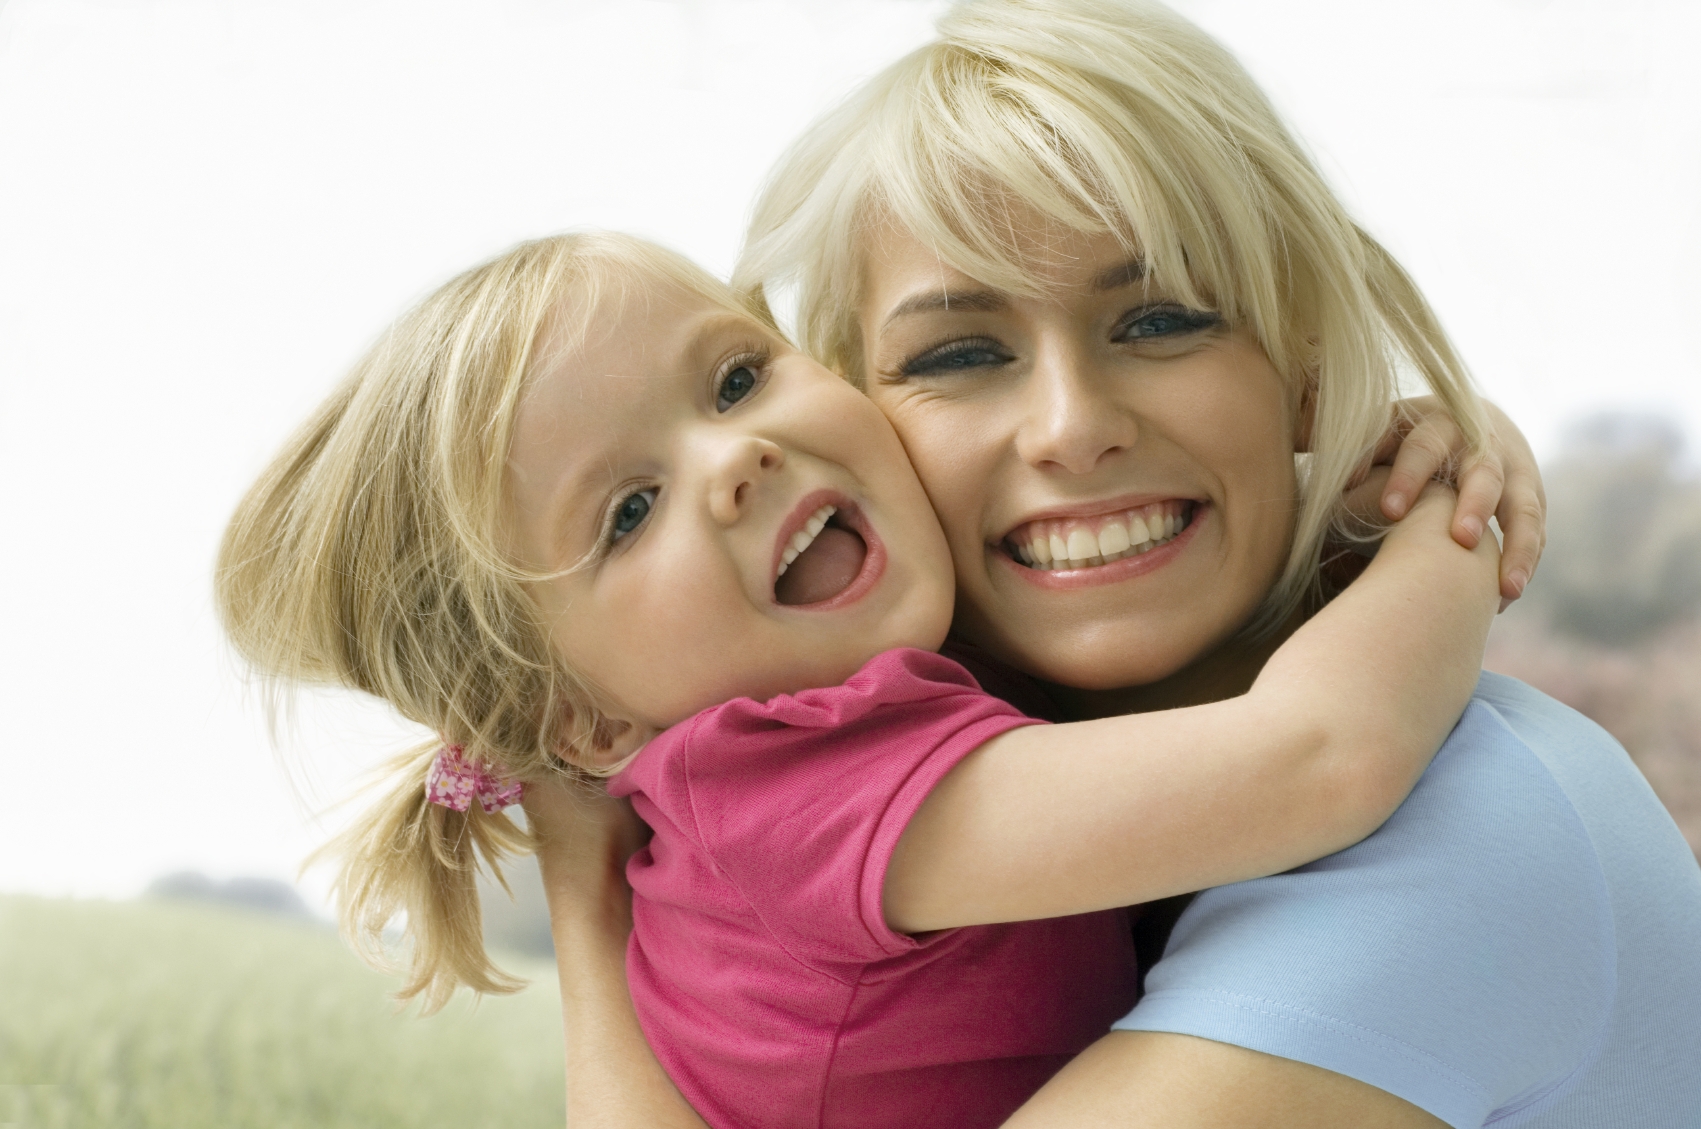 EMPOWERING PARENTS TO PROTECT CHILDREN | Topricin®